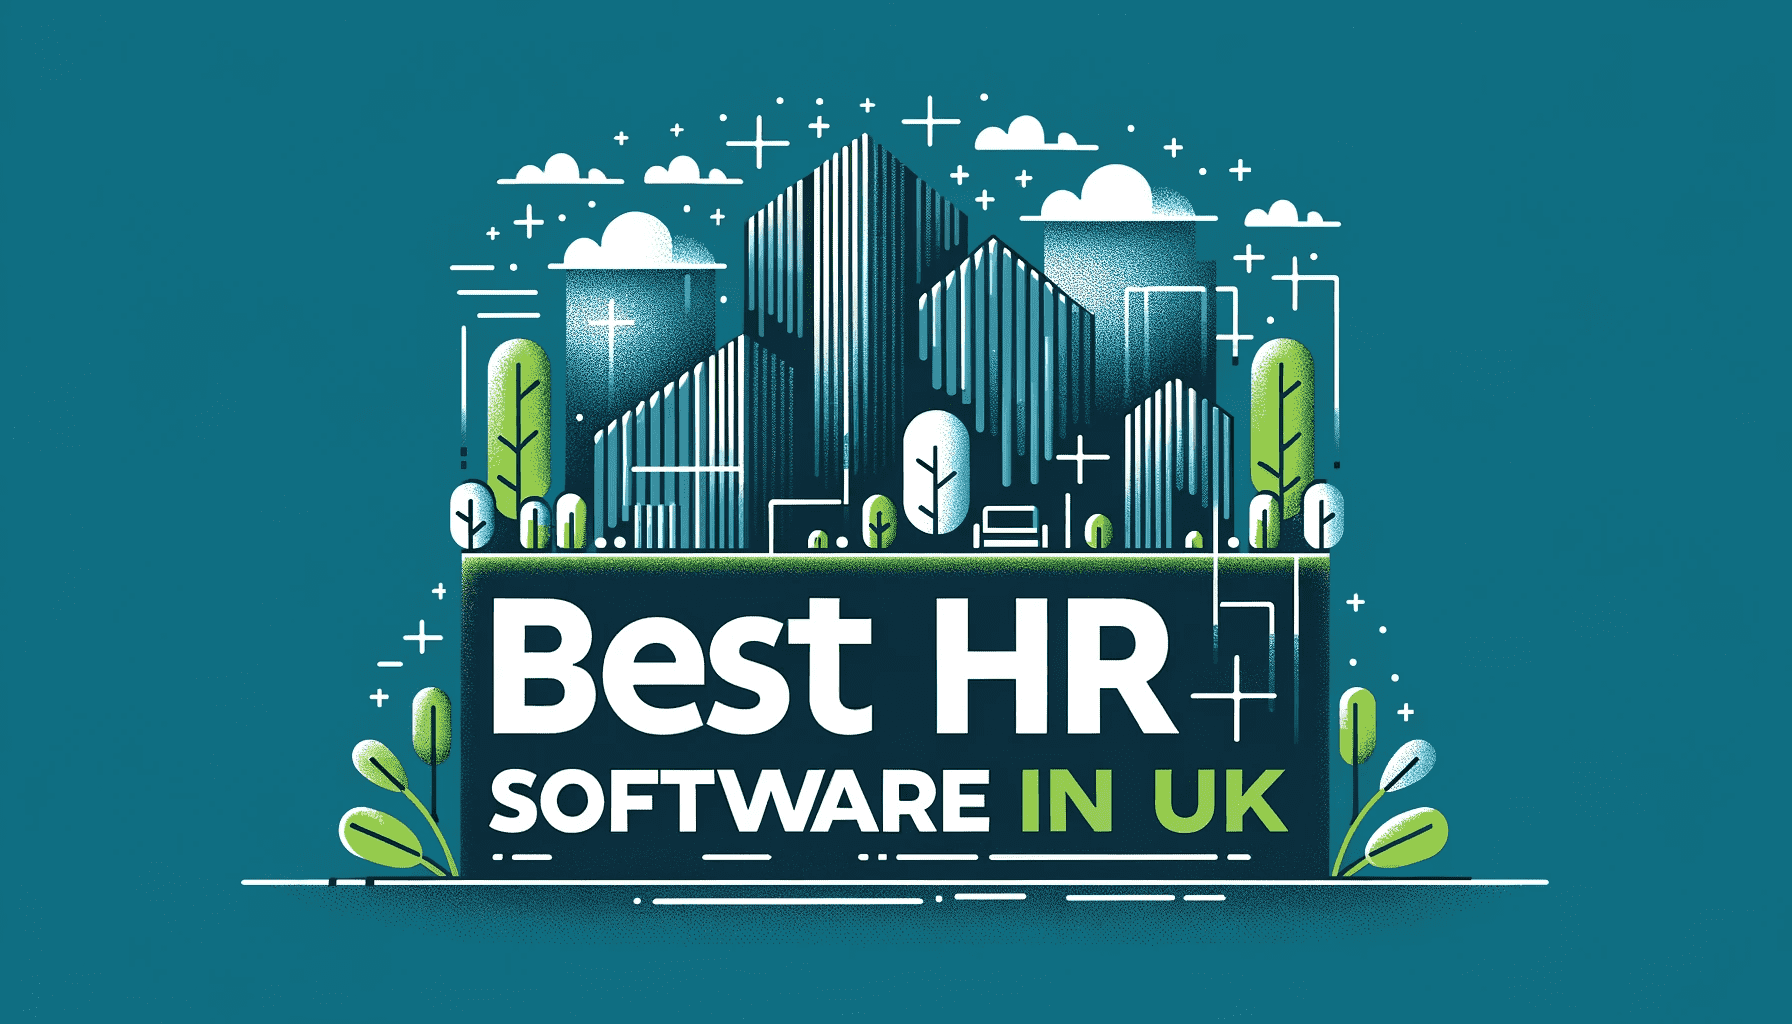 Paperless HR Software for Small Business UK